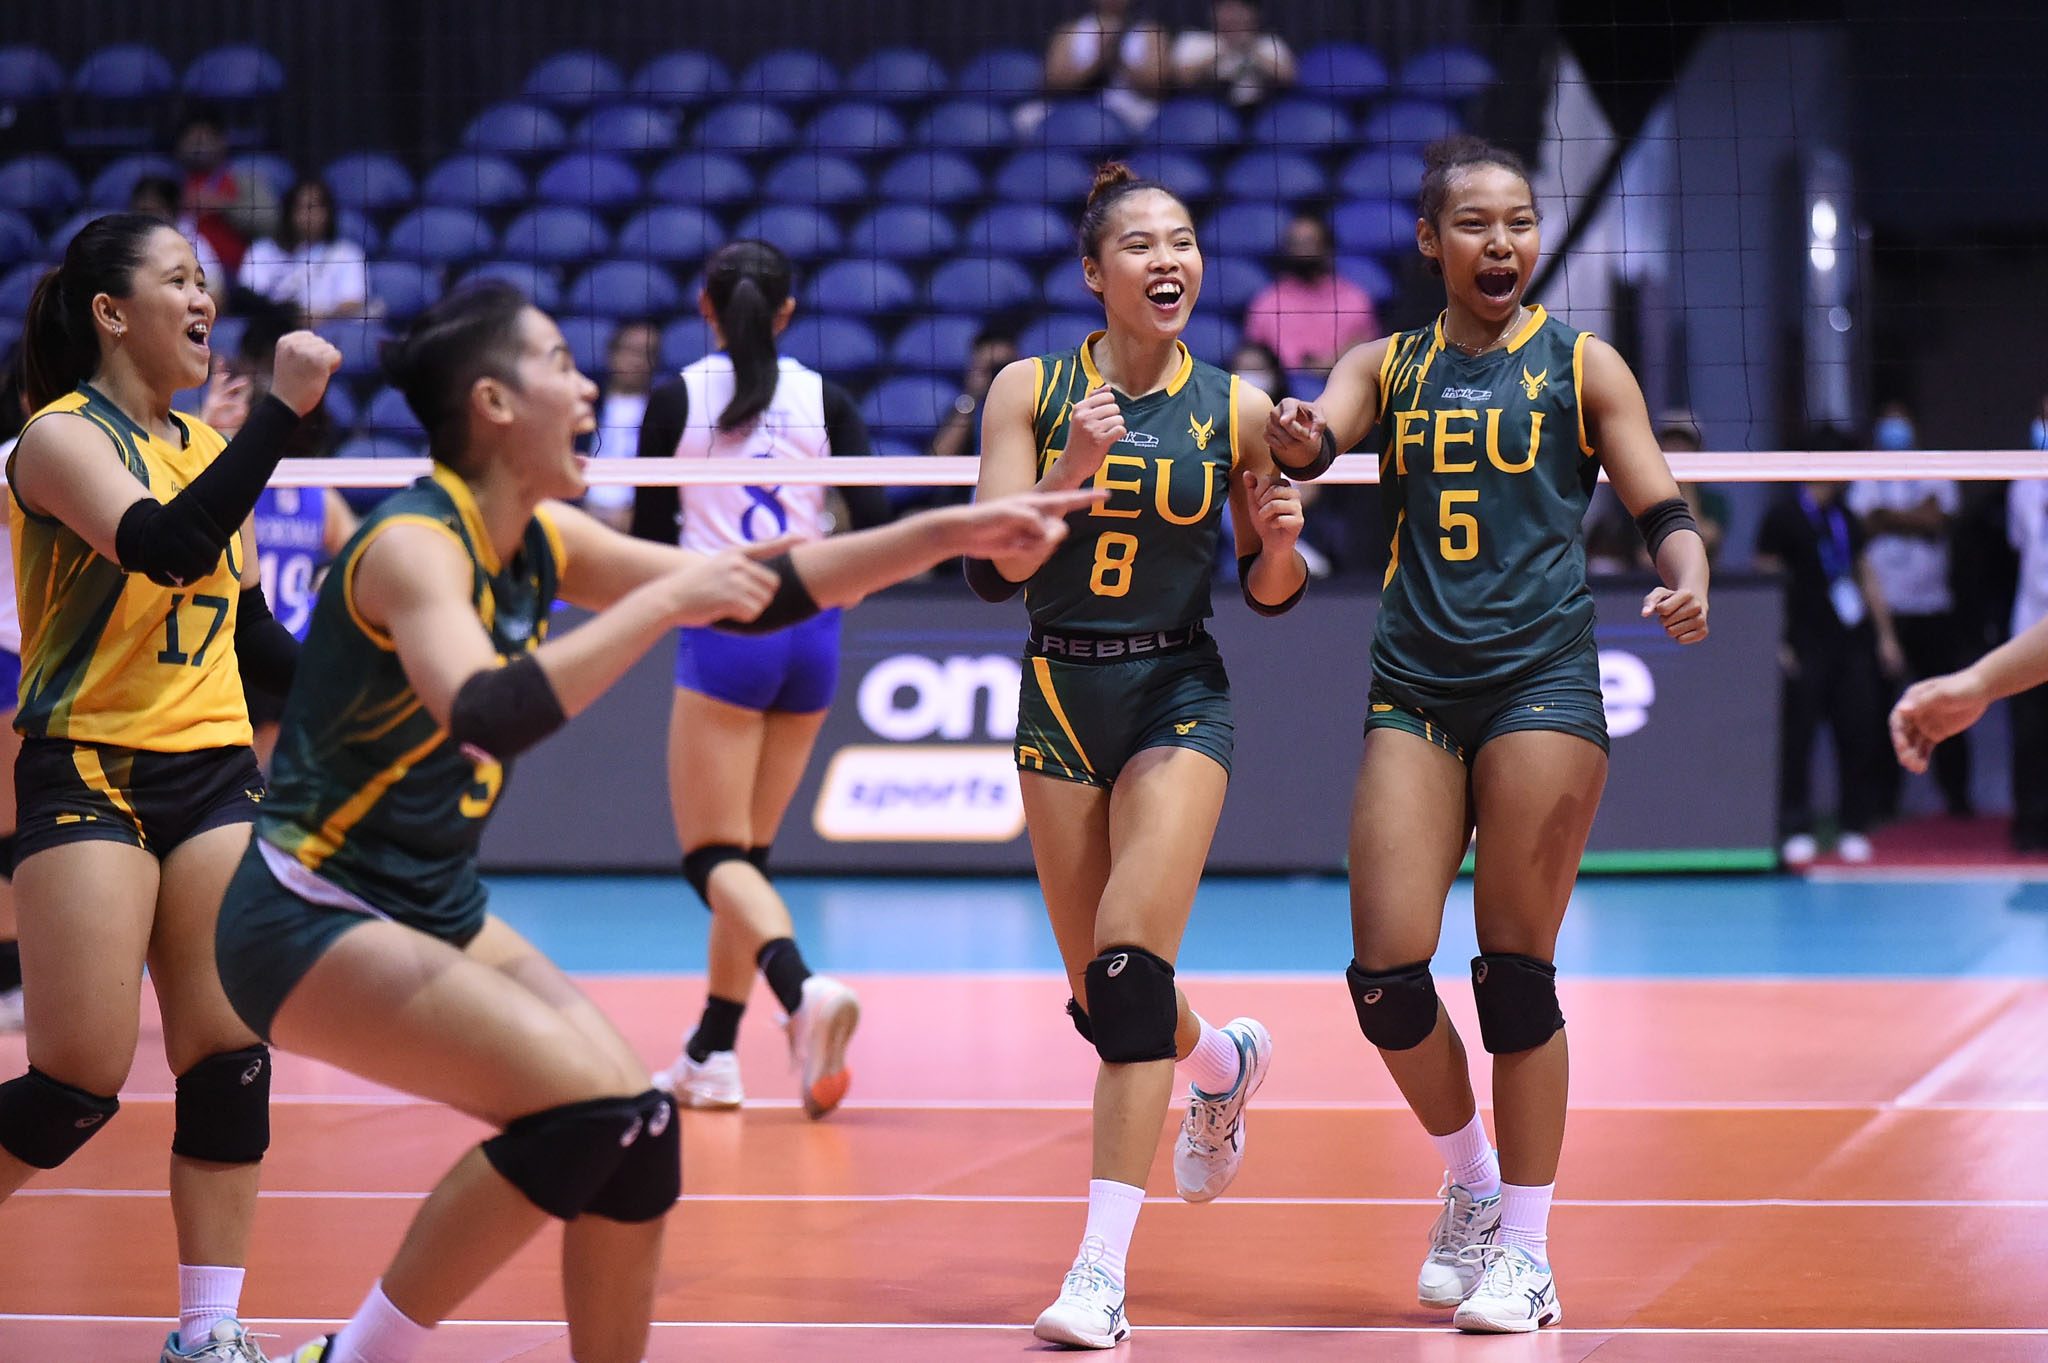 Feisty FEU guts out 5-set stunner over reeling Ateneo